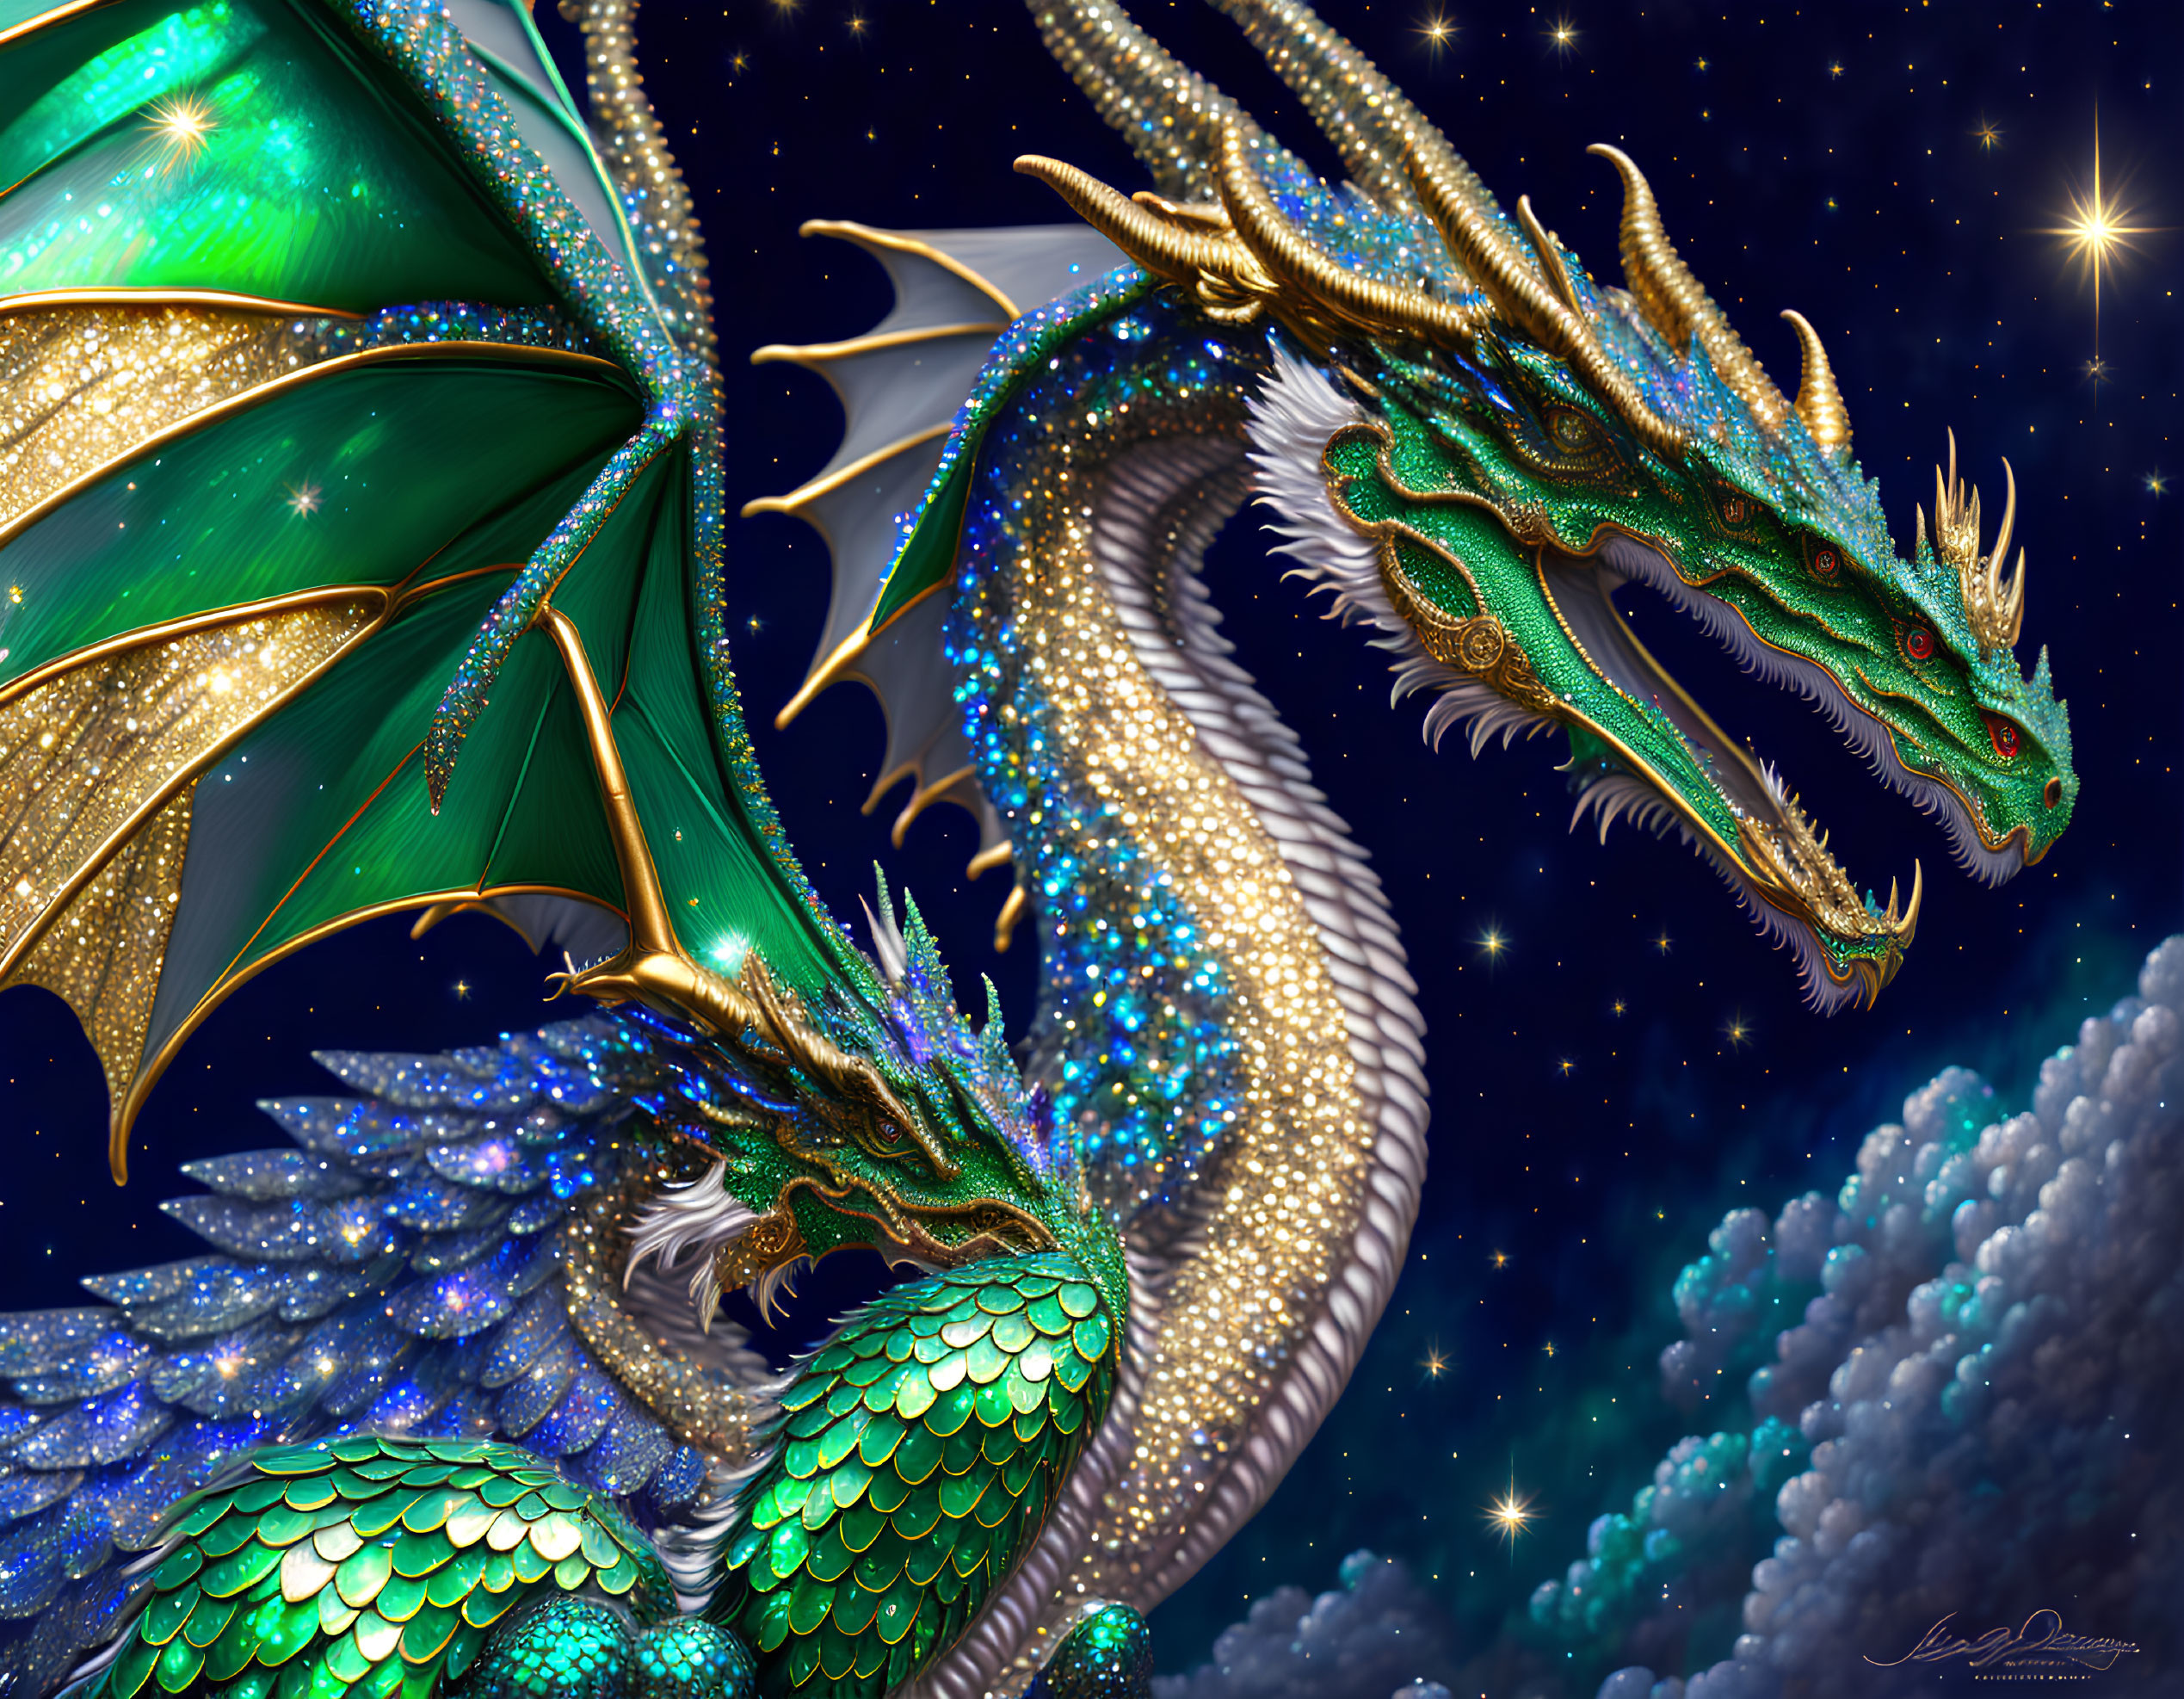 Detailed illustration of multi-headed dragon with green and blue scales in starry night sky